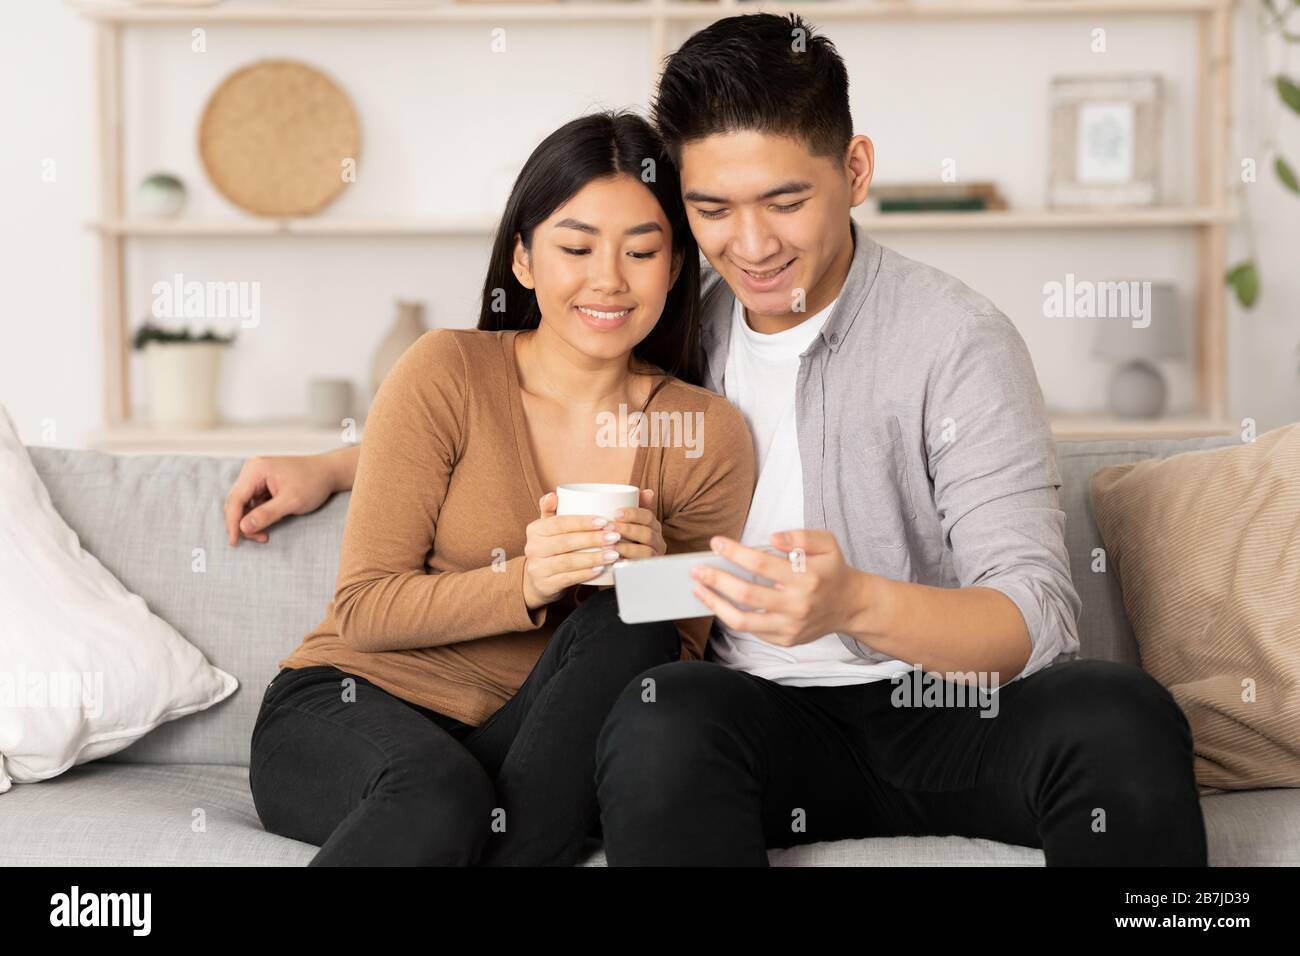 Korean couple resting at home, using phone Stock Photo